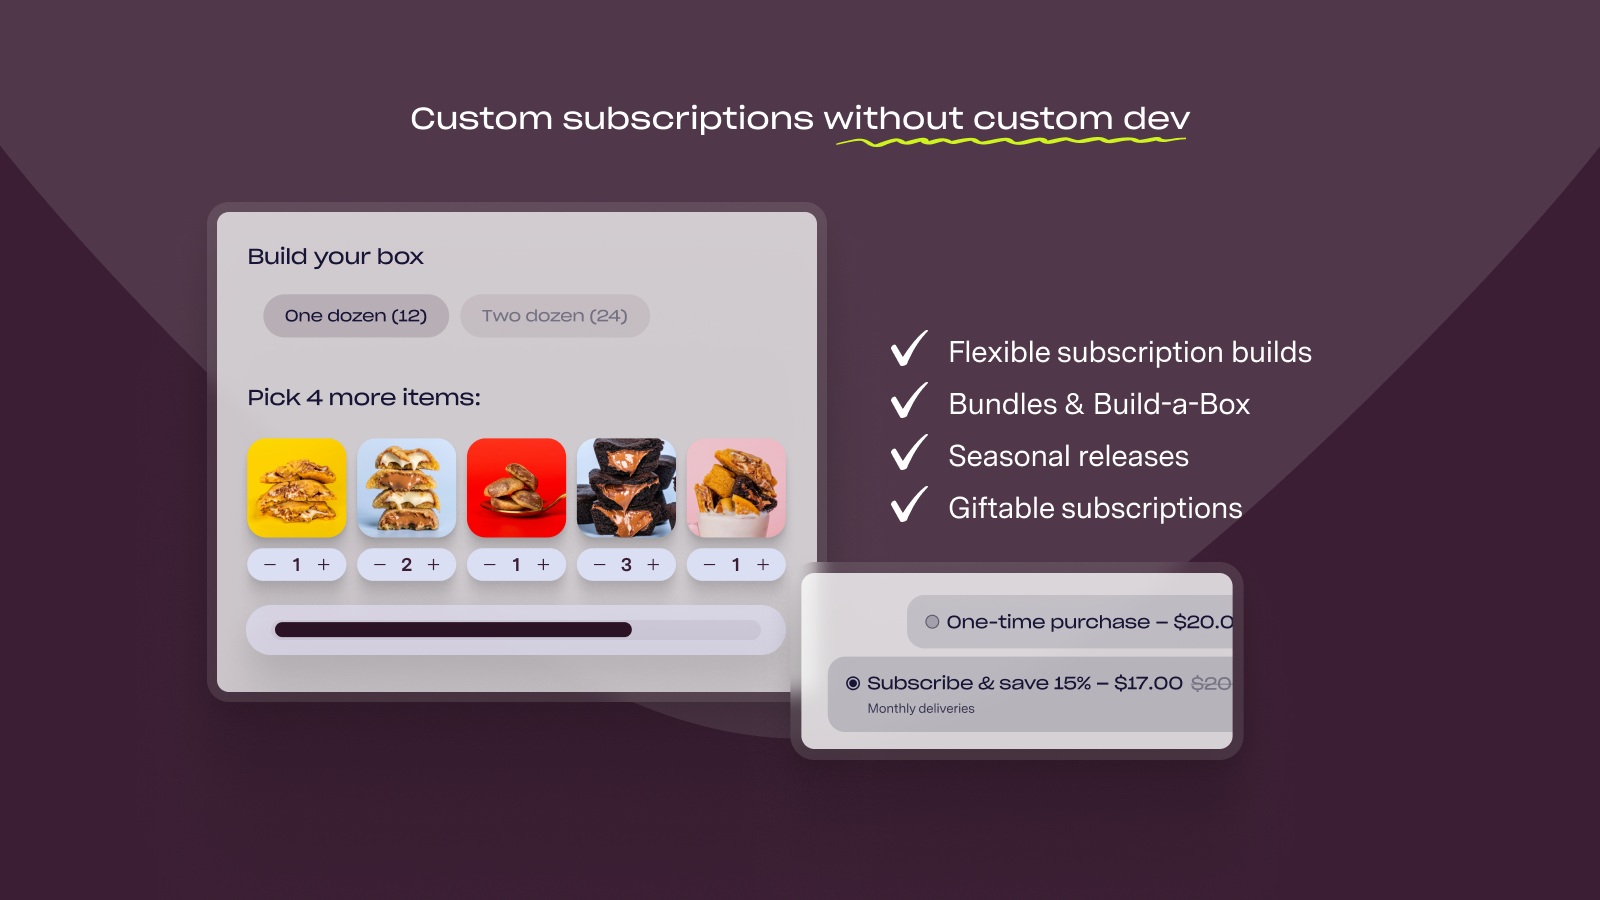 Custom subscriptions without custom dev